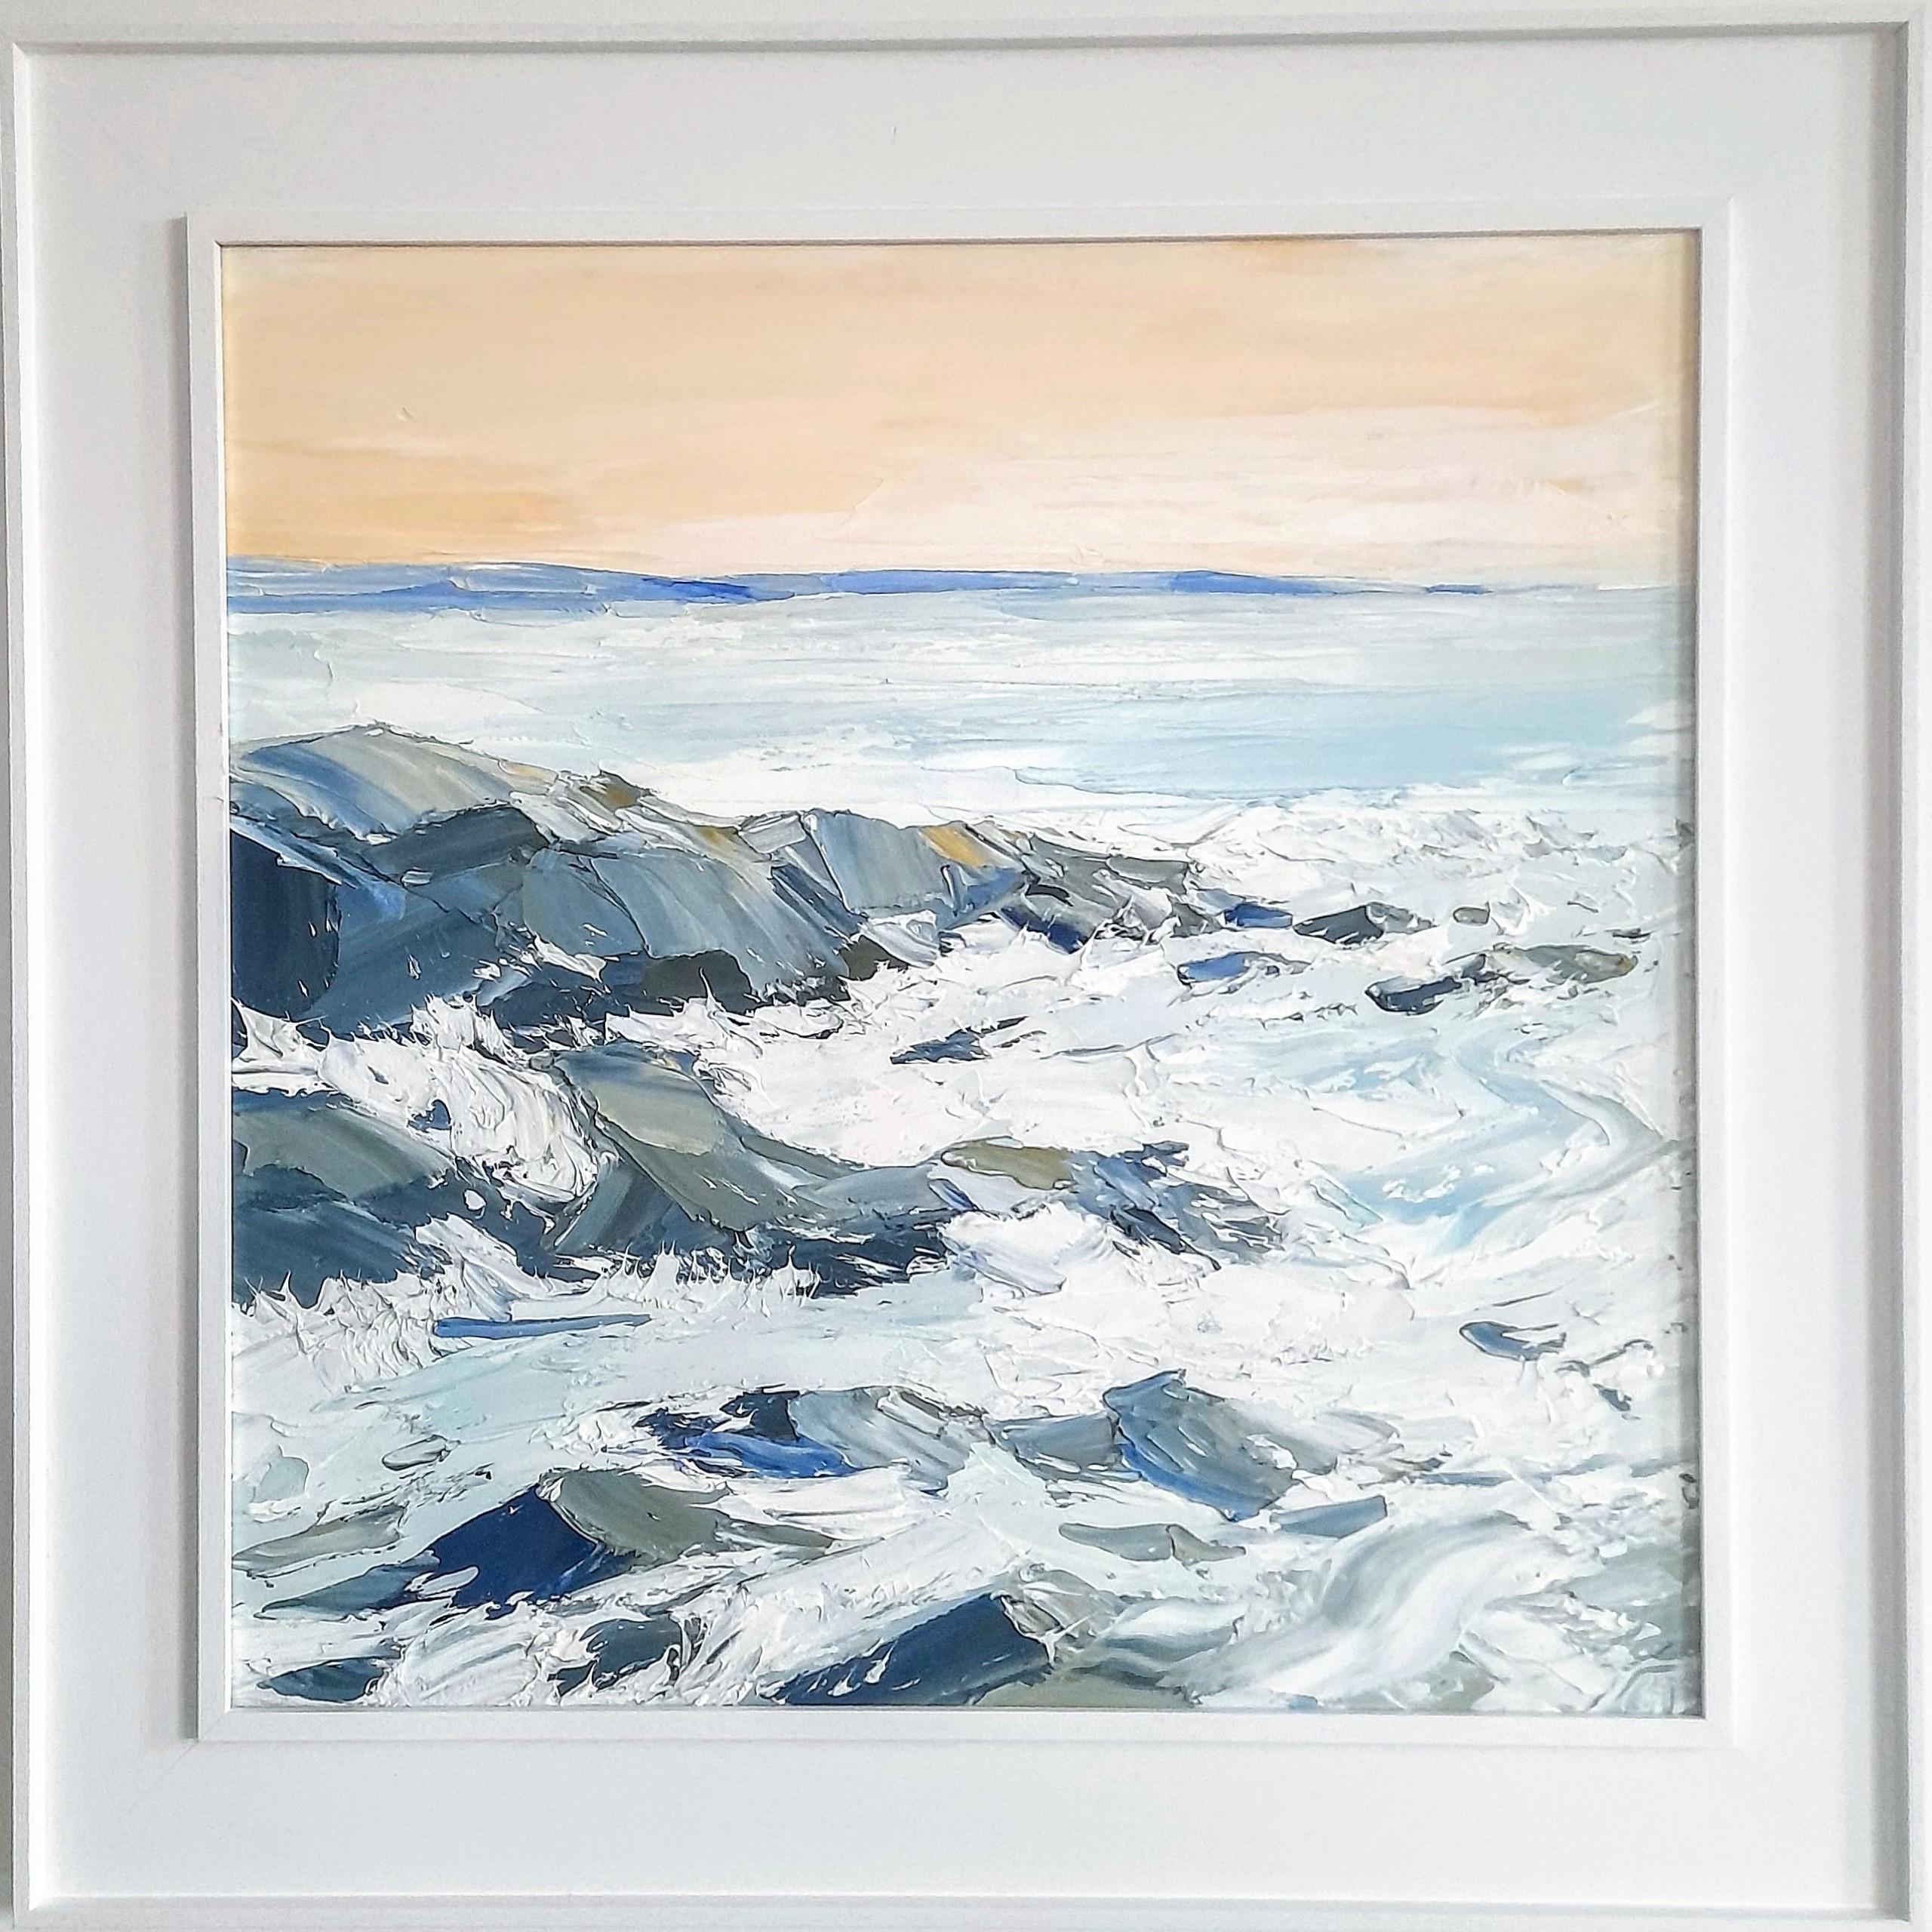 Georgie Dowling Landscape Painting - Incoming Tide At The Breakwater, Semi Abstract Seascape Painting, Textured Art